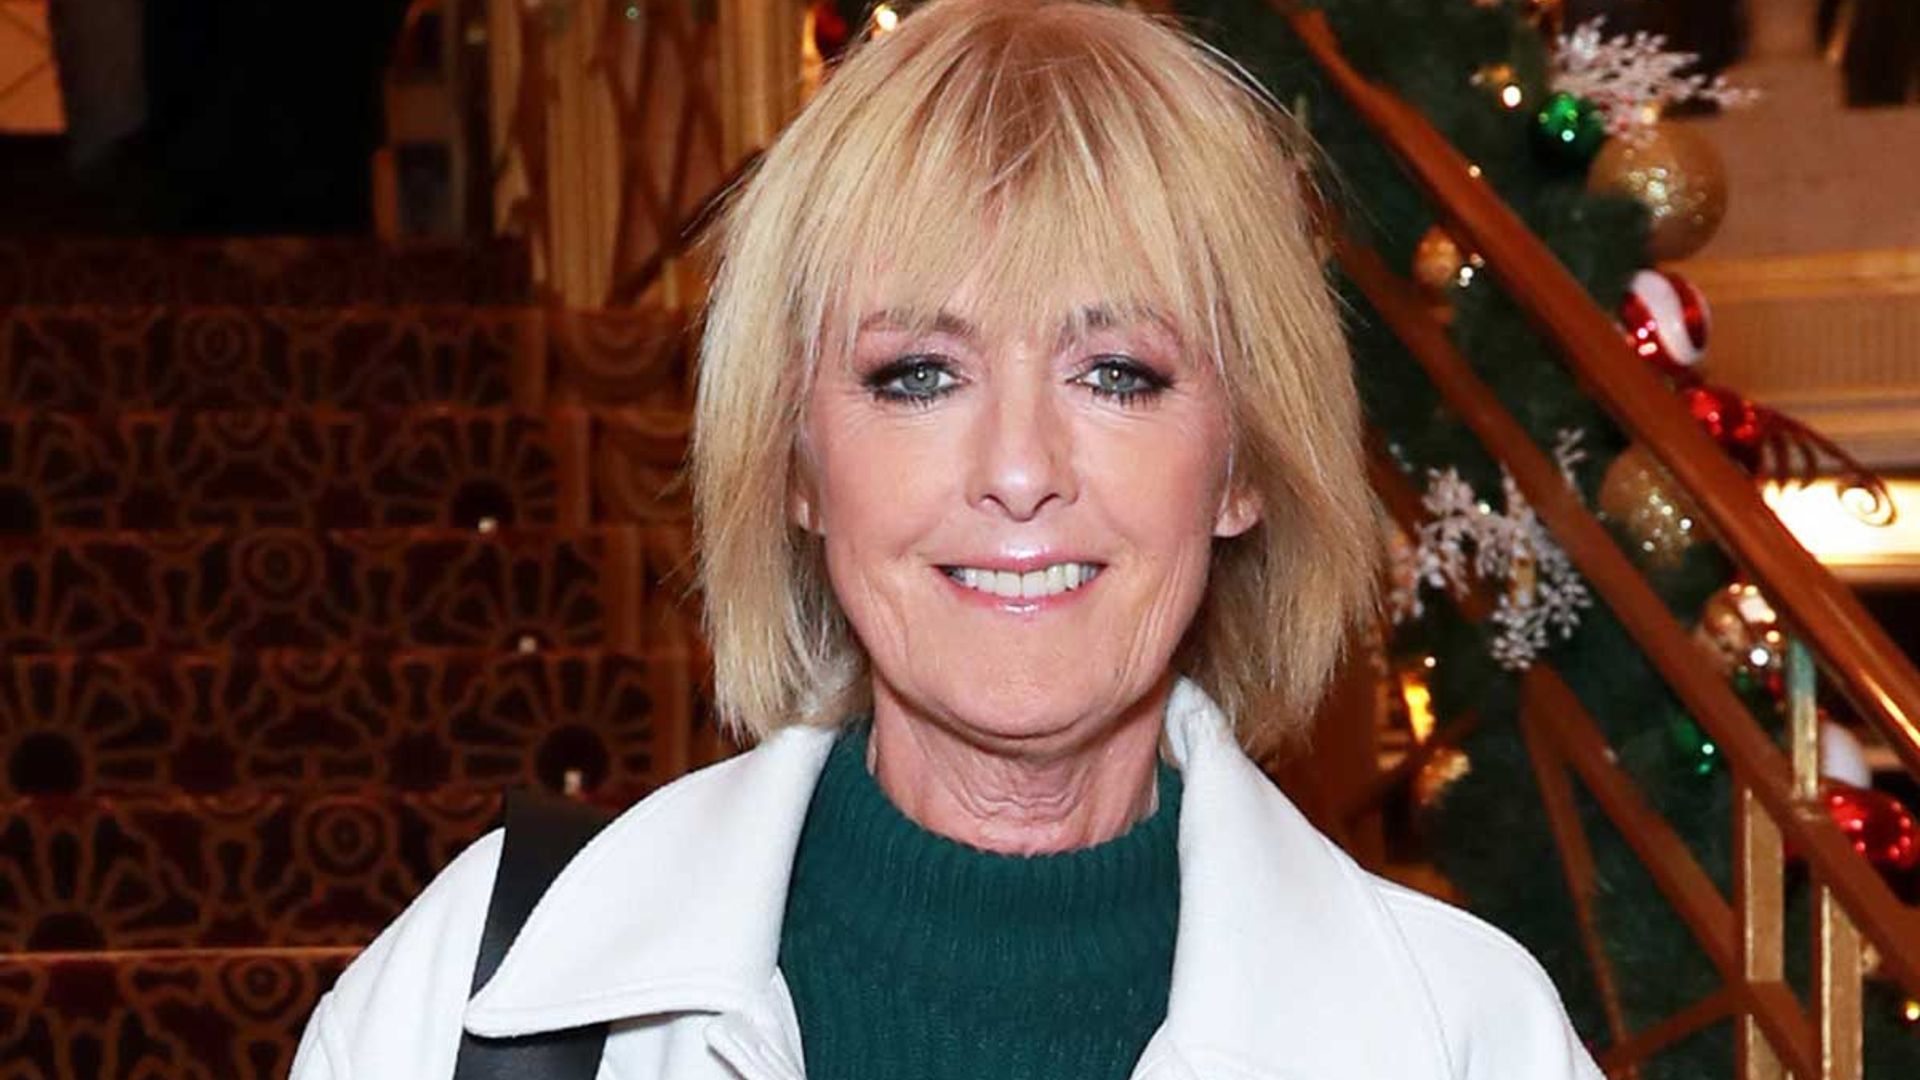 Jane Moore wows in mermaid-style dress with unexpected texture